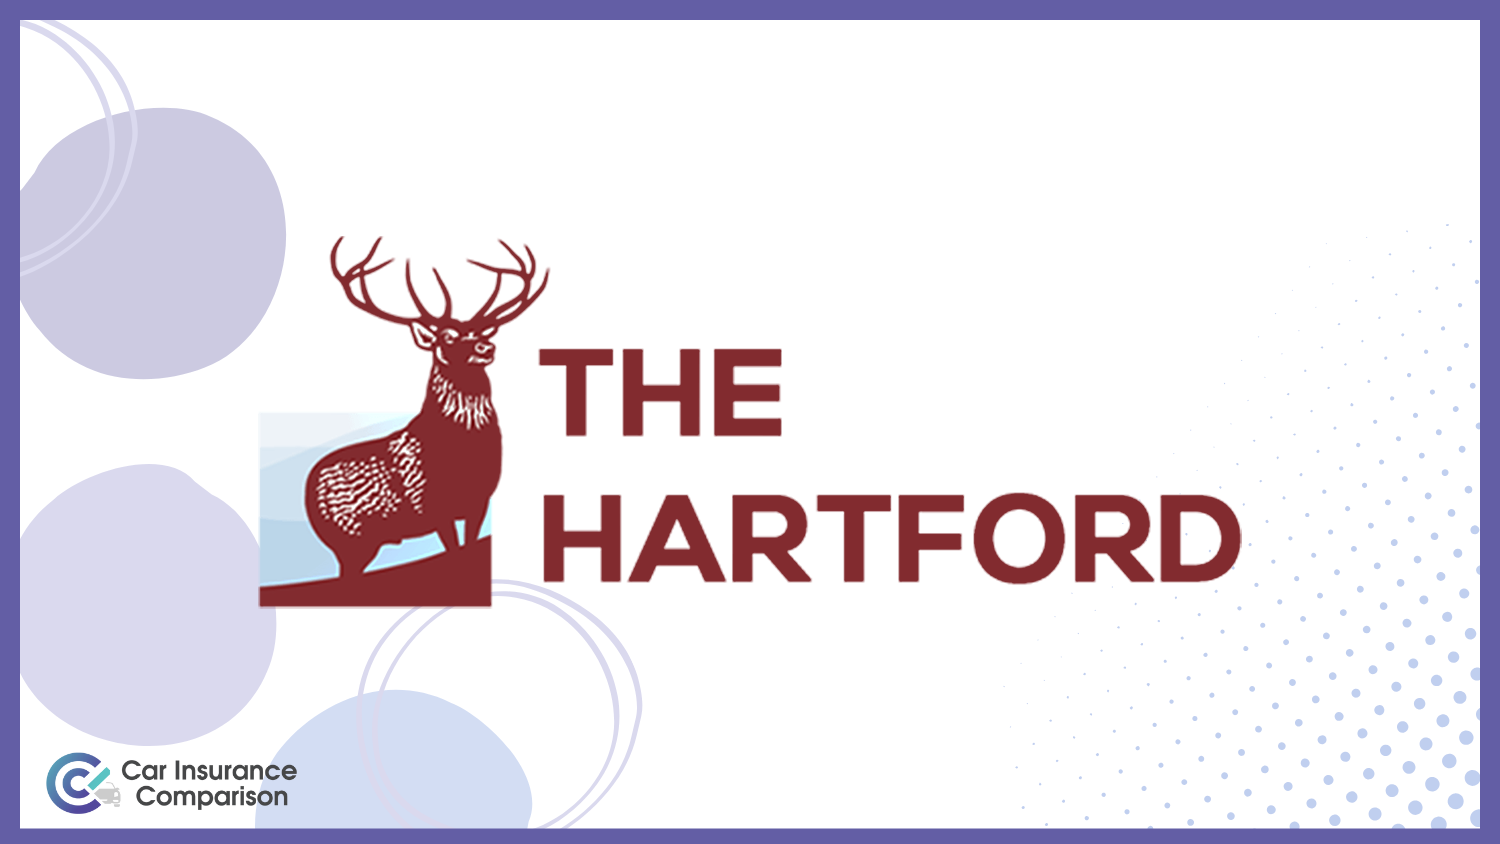 The Hartford: Best Car Insurance Companies for Financed Cars